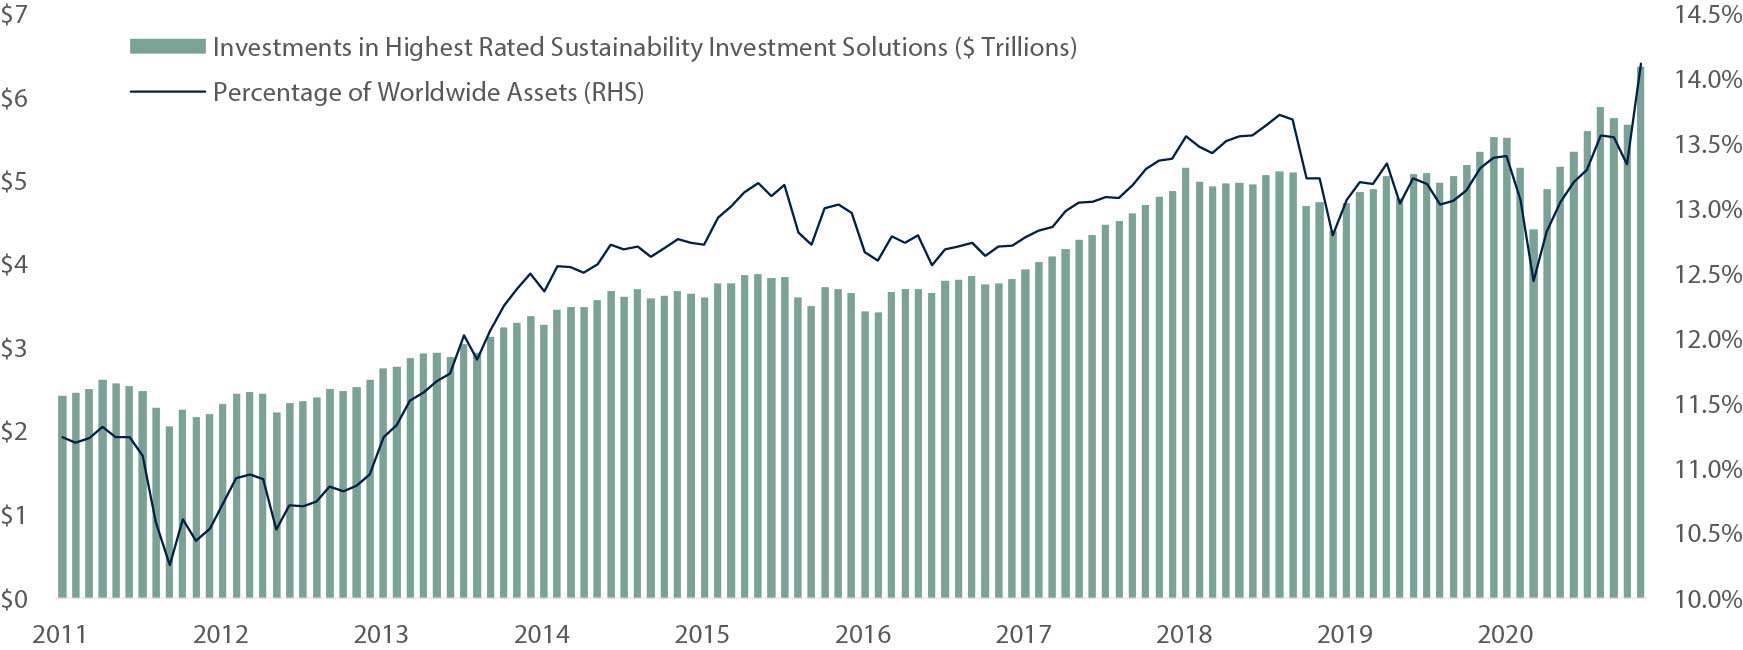 Demand For Sustainable Investments Is Growing, Alongside Market Share